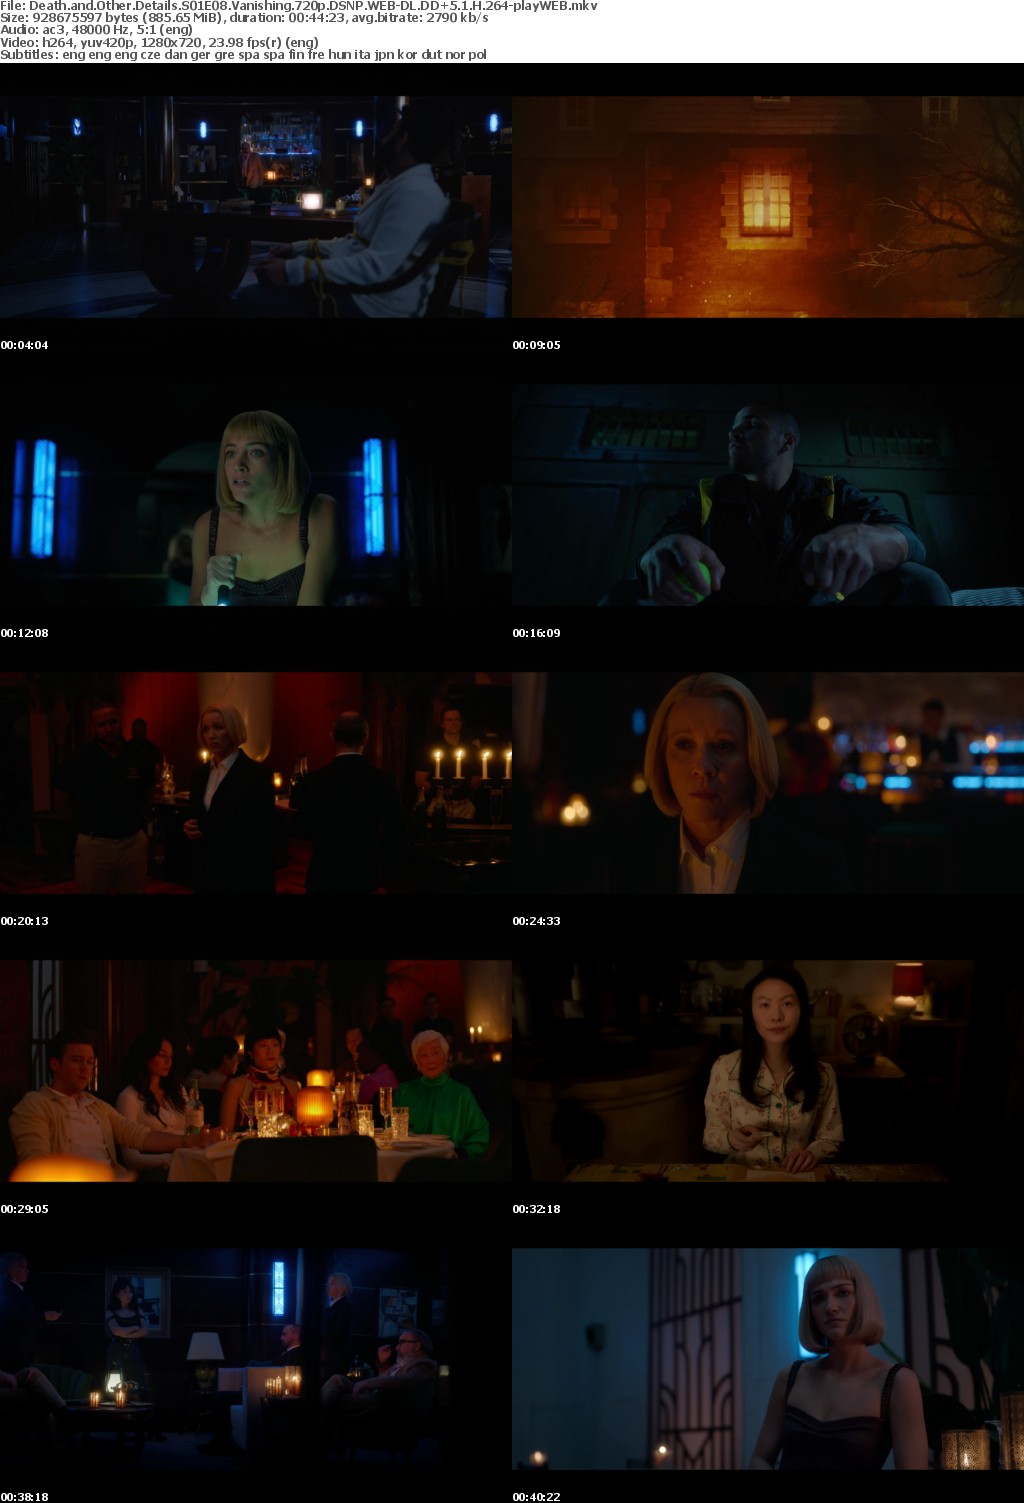 Death and Other Details S01E08 Vanishing 720p DSNP WEB-DL DD+5 1 H 264-playWEB